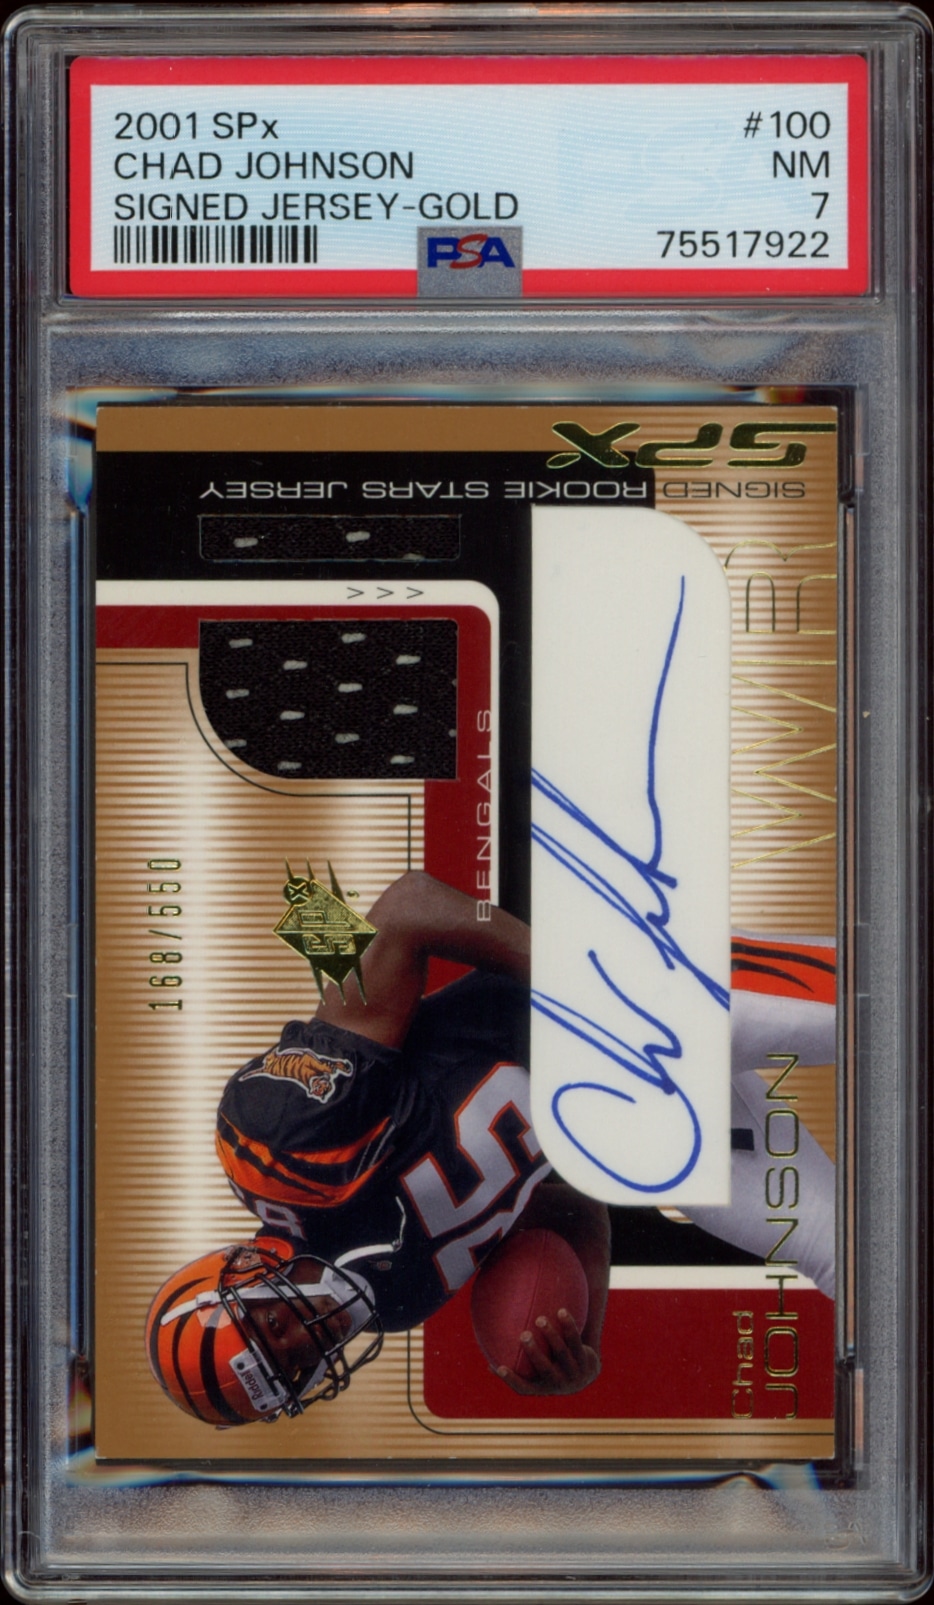 2001 SPx Chad Johnson autographed jersey card, PSA NM-MT 8 graded.